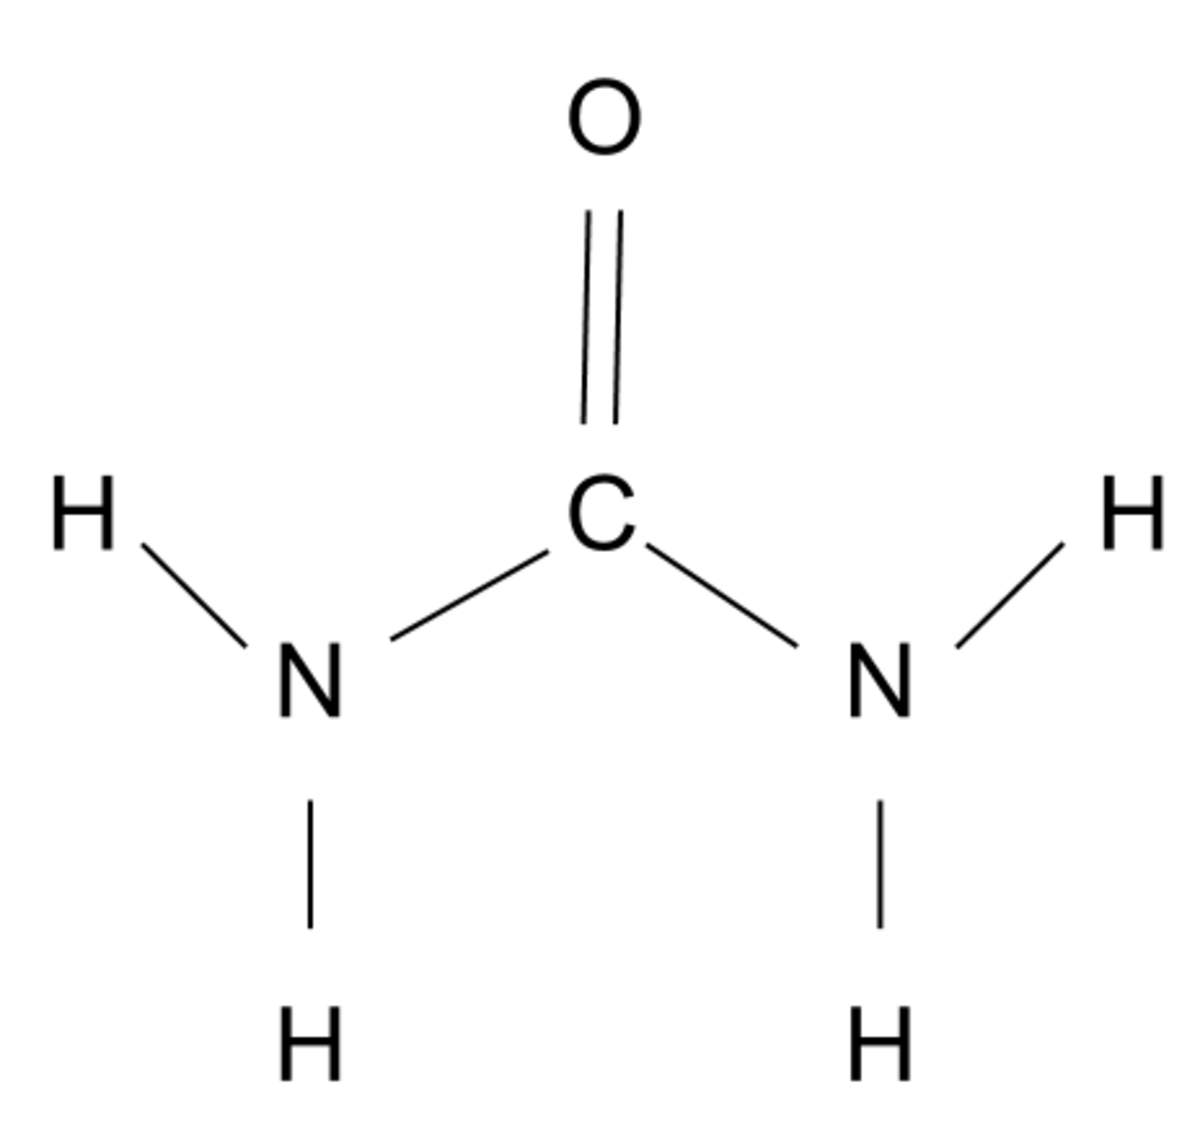 Urea (shown above) was the first organic compound synthesized in the laboratory.